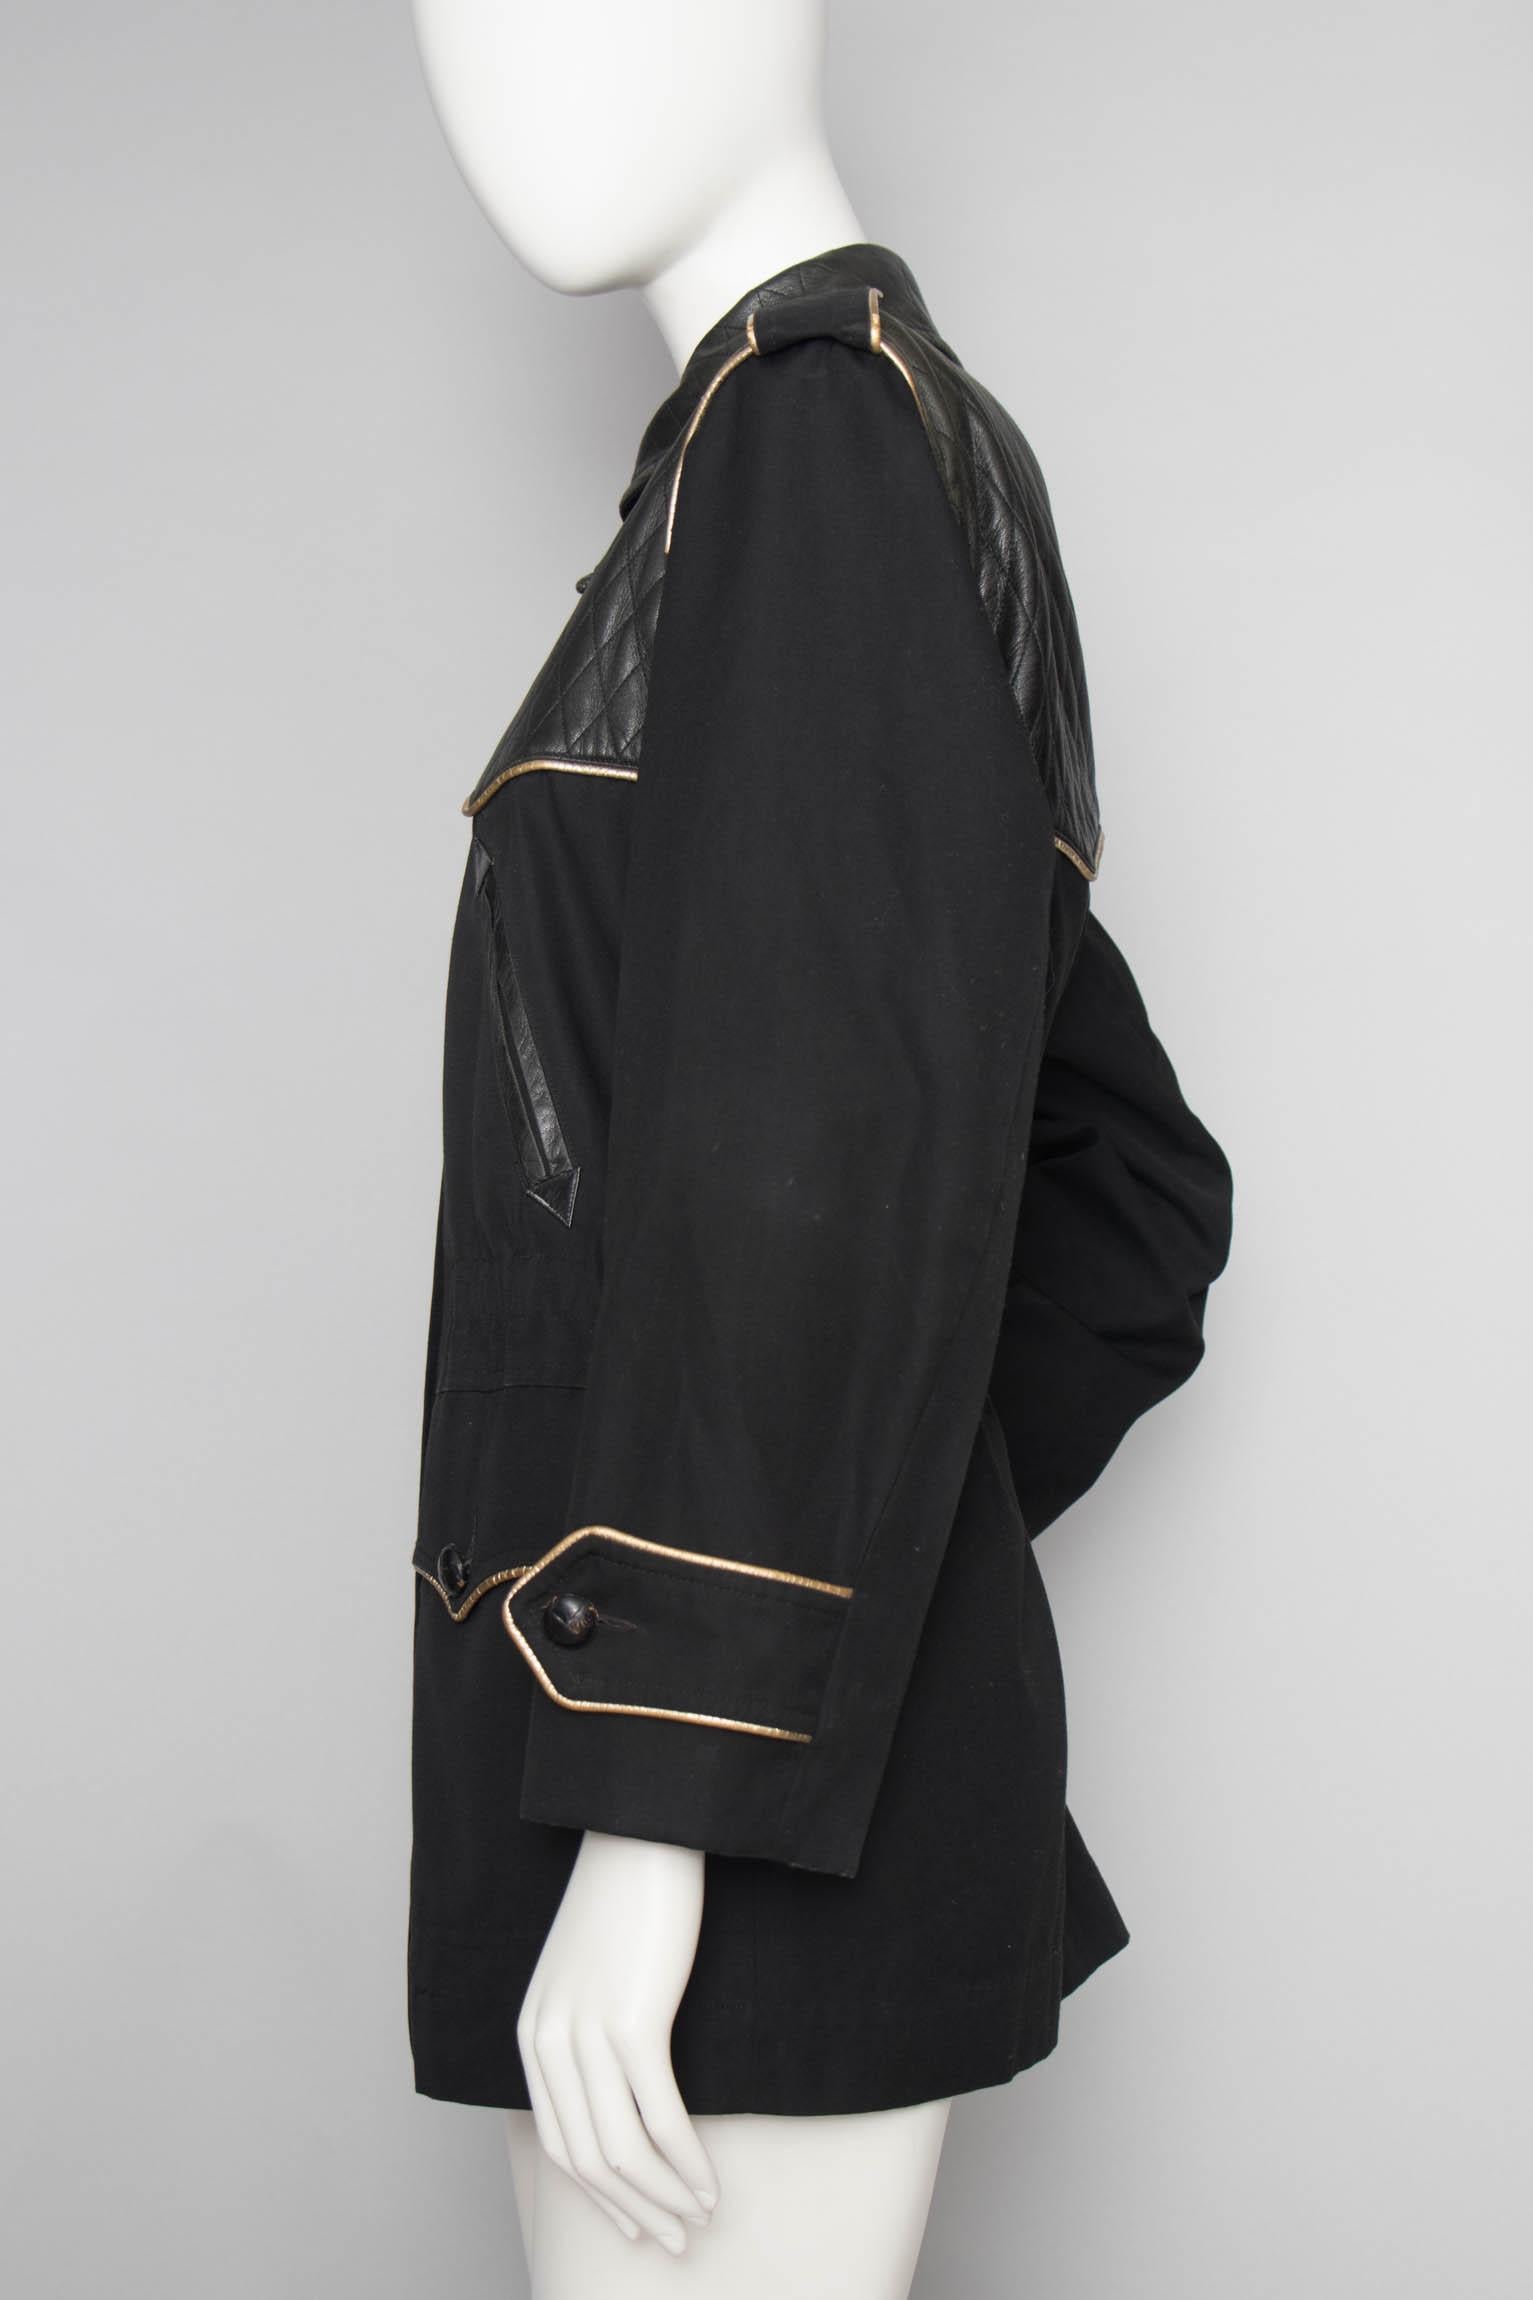 Women's Yves Saint Laurent Rive Gauche Jacket with Leather and Gold Trim, 1980s